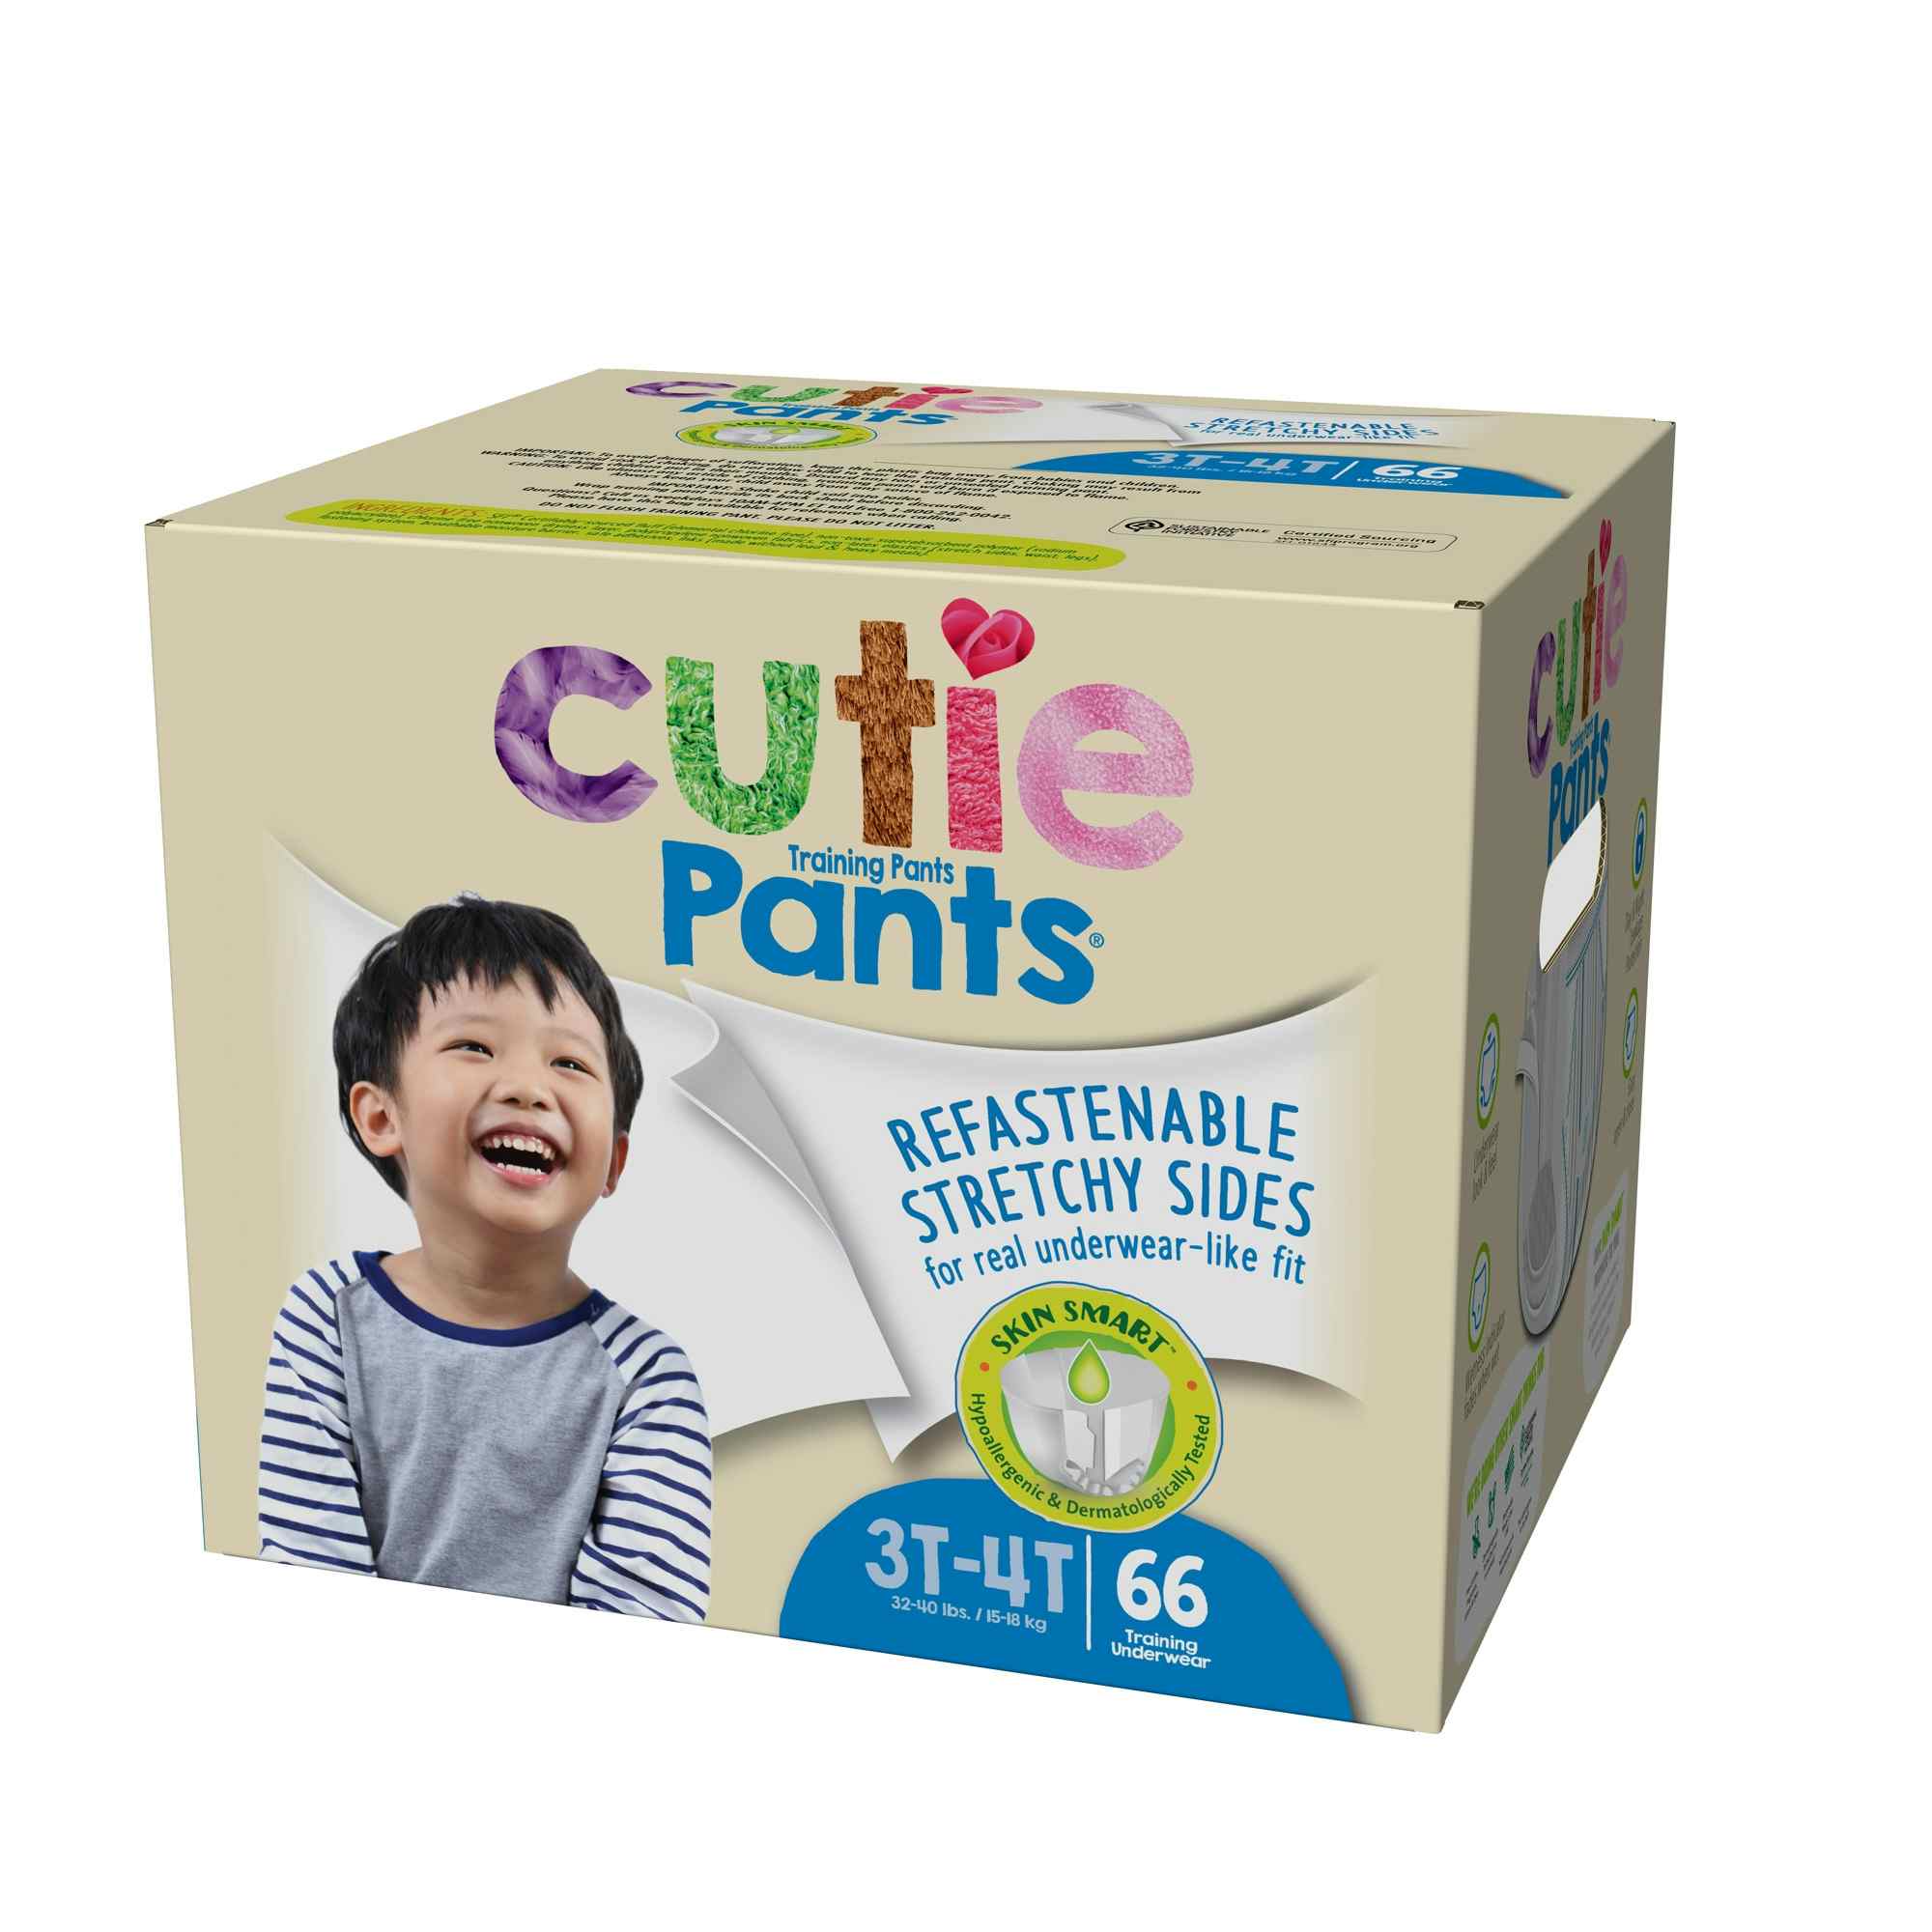 Cutie Pants Disposable Male Toddler Training Pants, Heavy, CR8007, Sea Animals, Size 3T-4T, 32-40 lbs - Case of 92